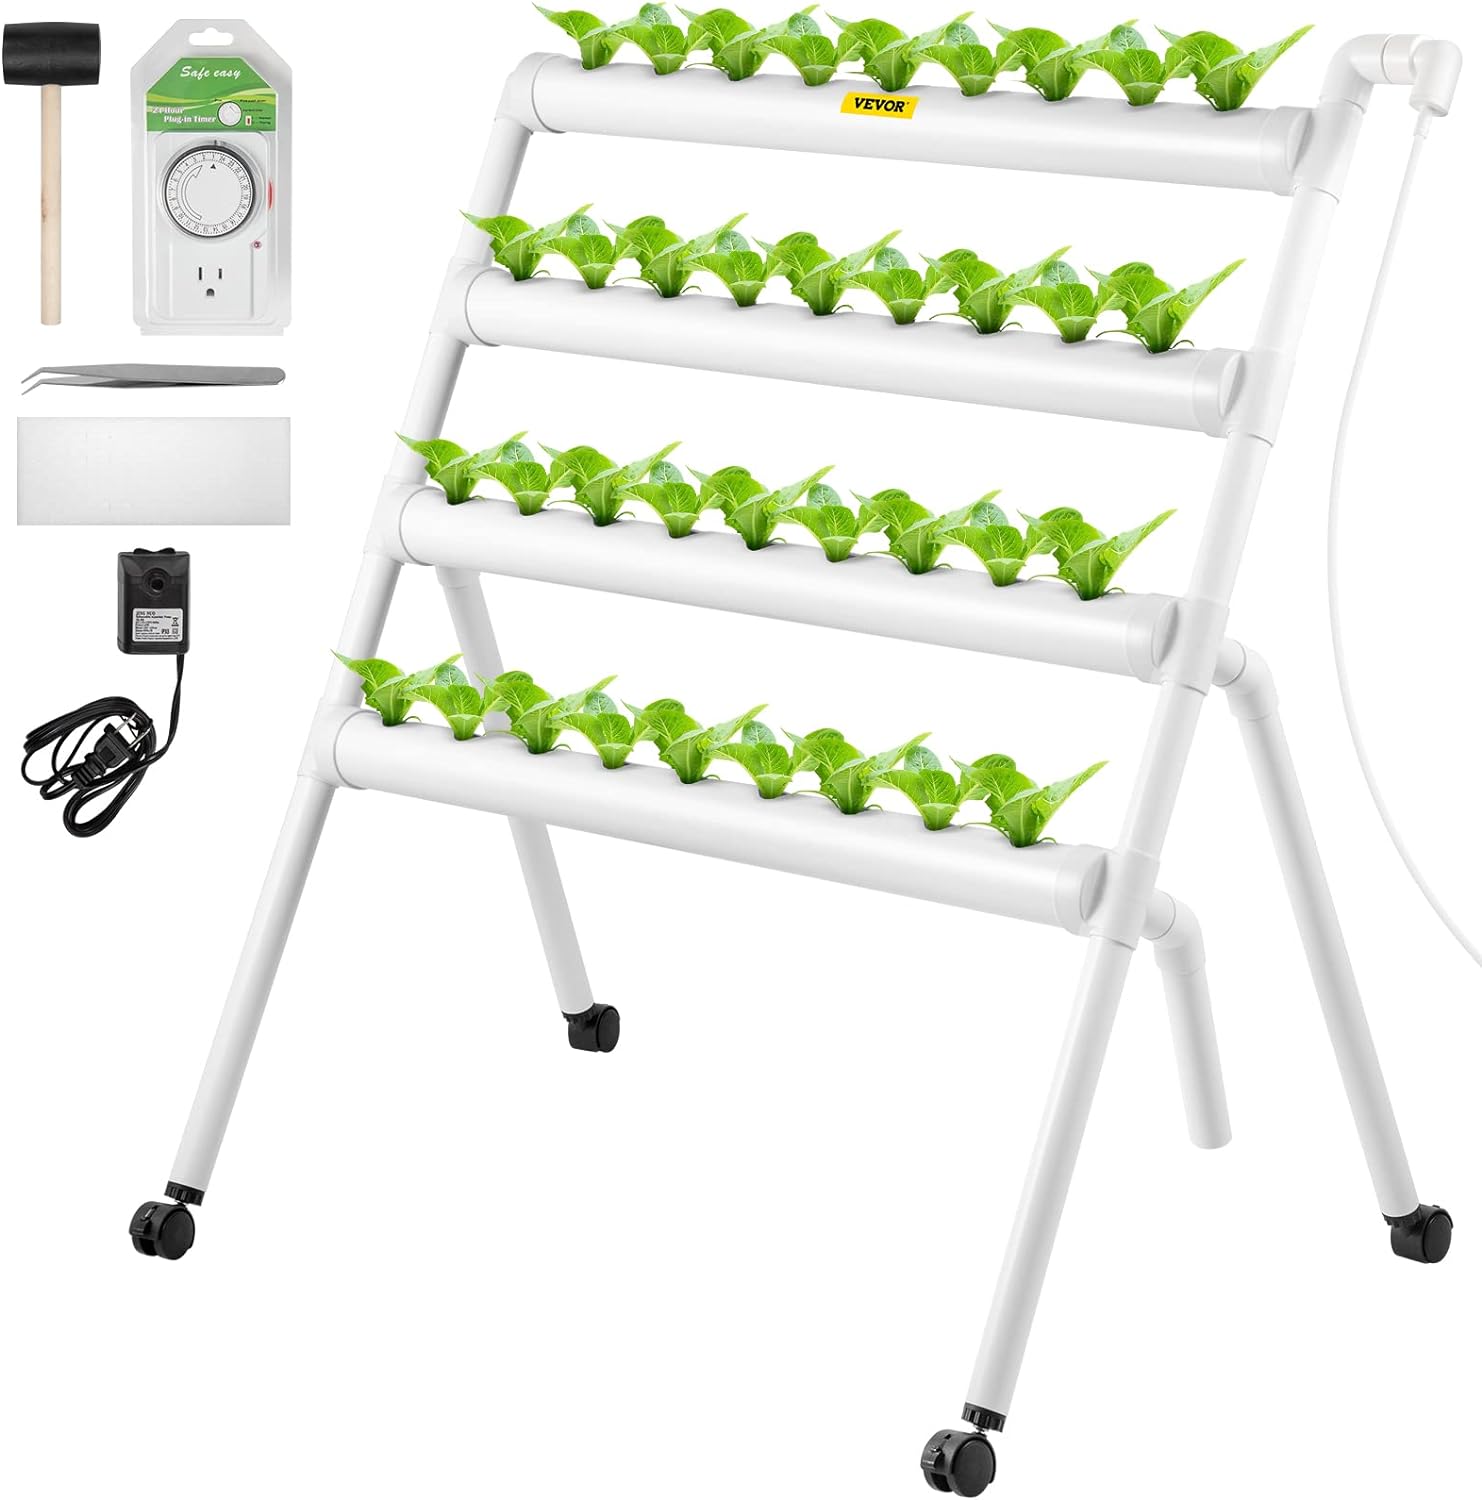 Hydroponics Growing System, 36 Sites 4 Food-Grade PVC-U Pipes, 4 Layers Indoor Planting Kit with Water Pump, Timer, Nest Basket, Sponge for Fruits, Vegetables, Herb, White